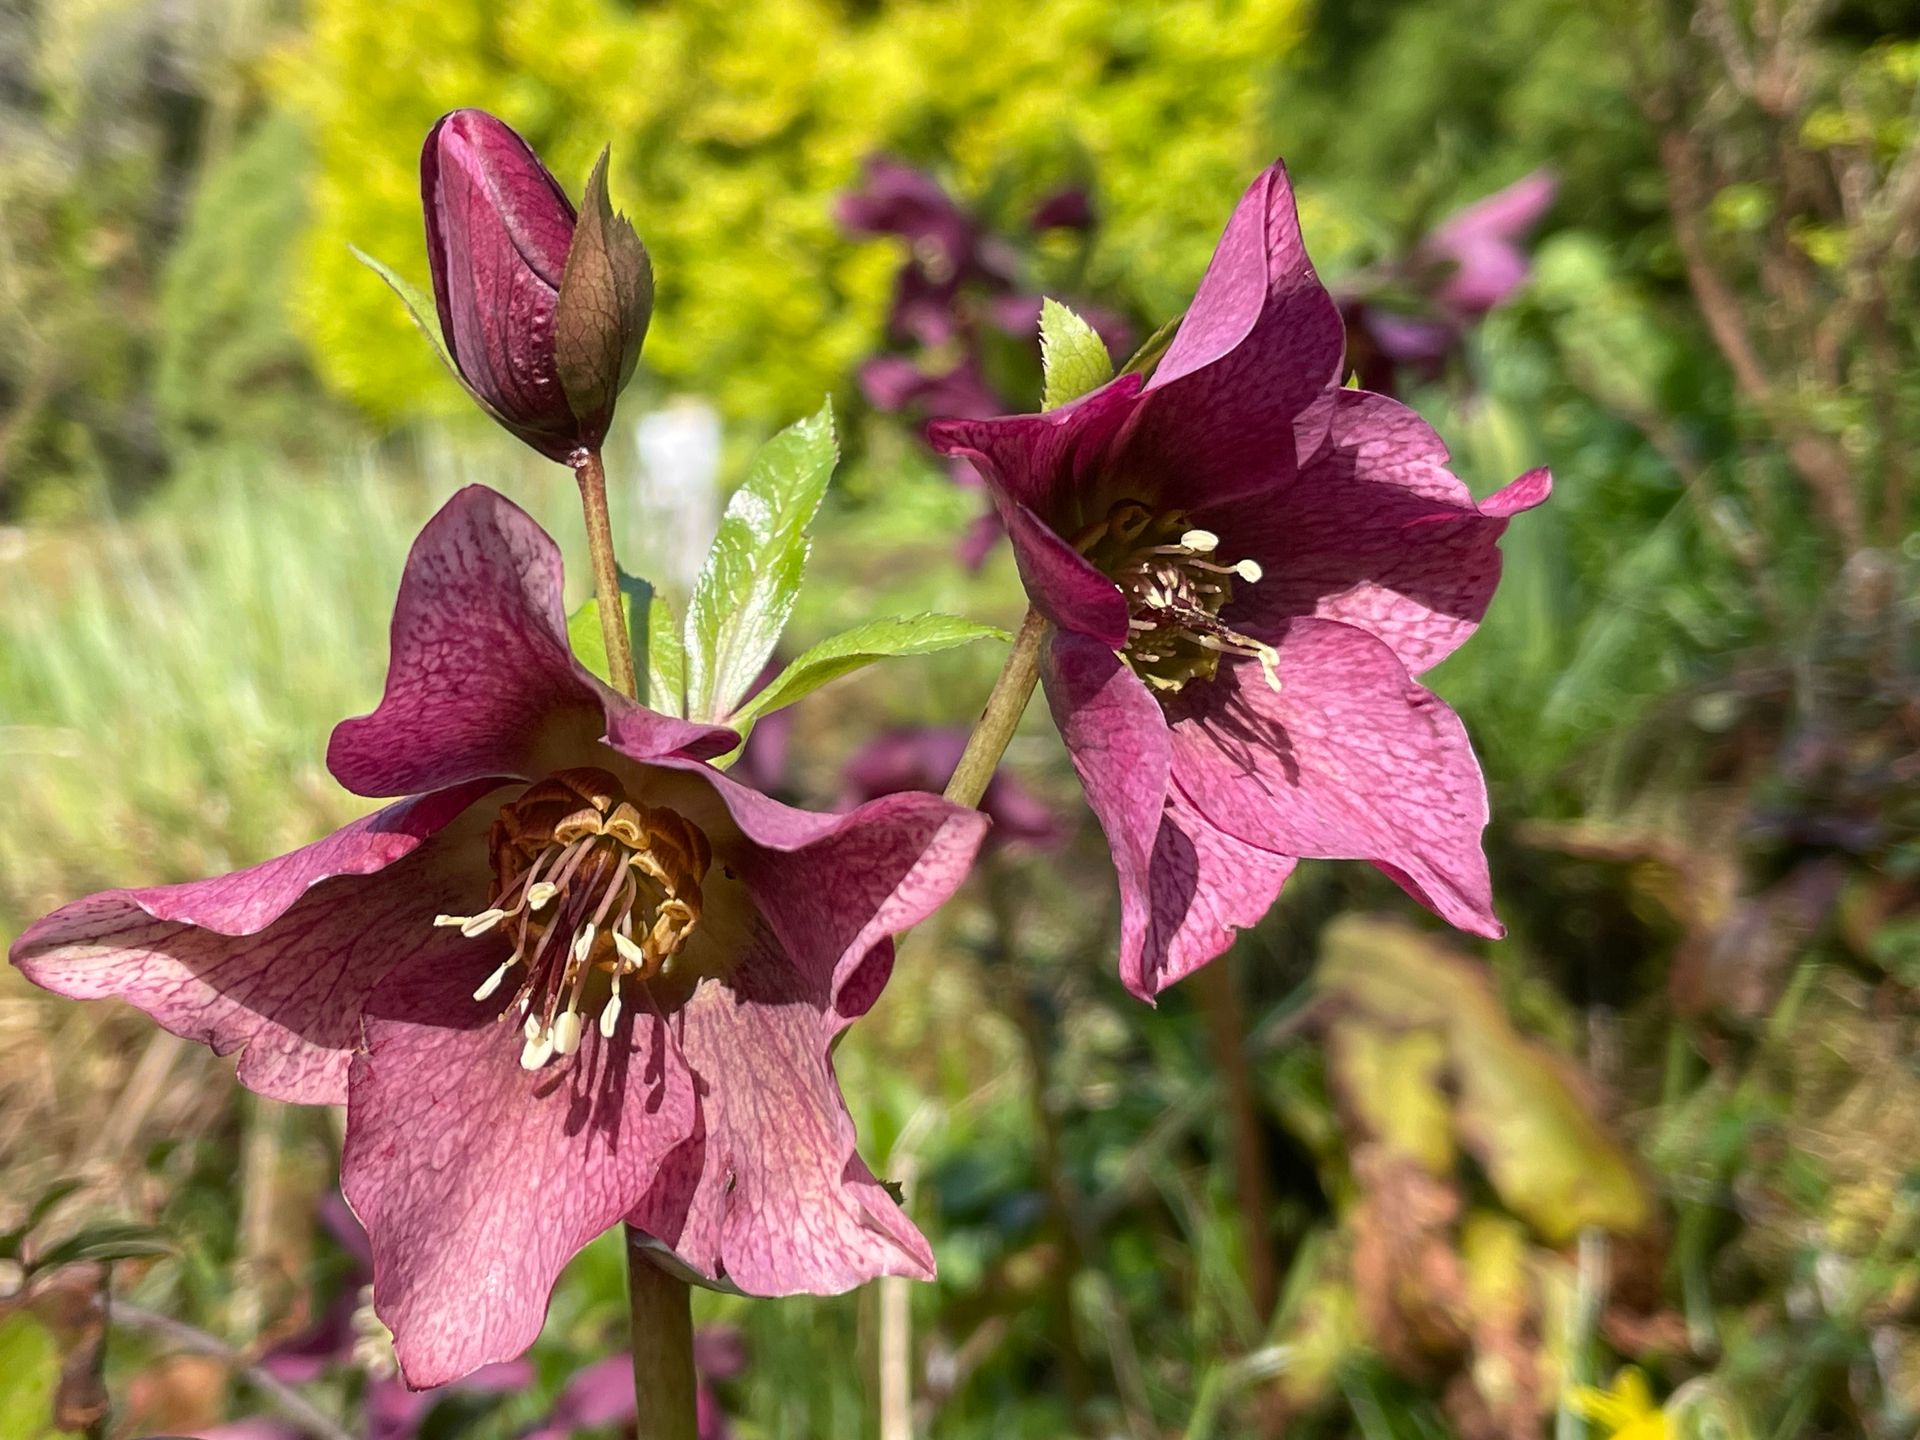 Two purple hellebore flowers light by bright sunshine with a green foliage background.